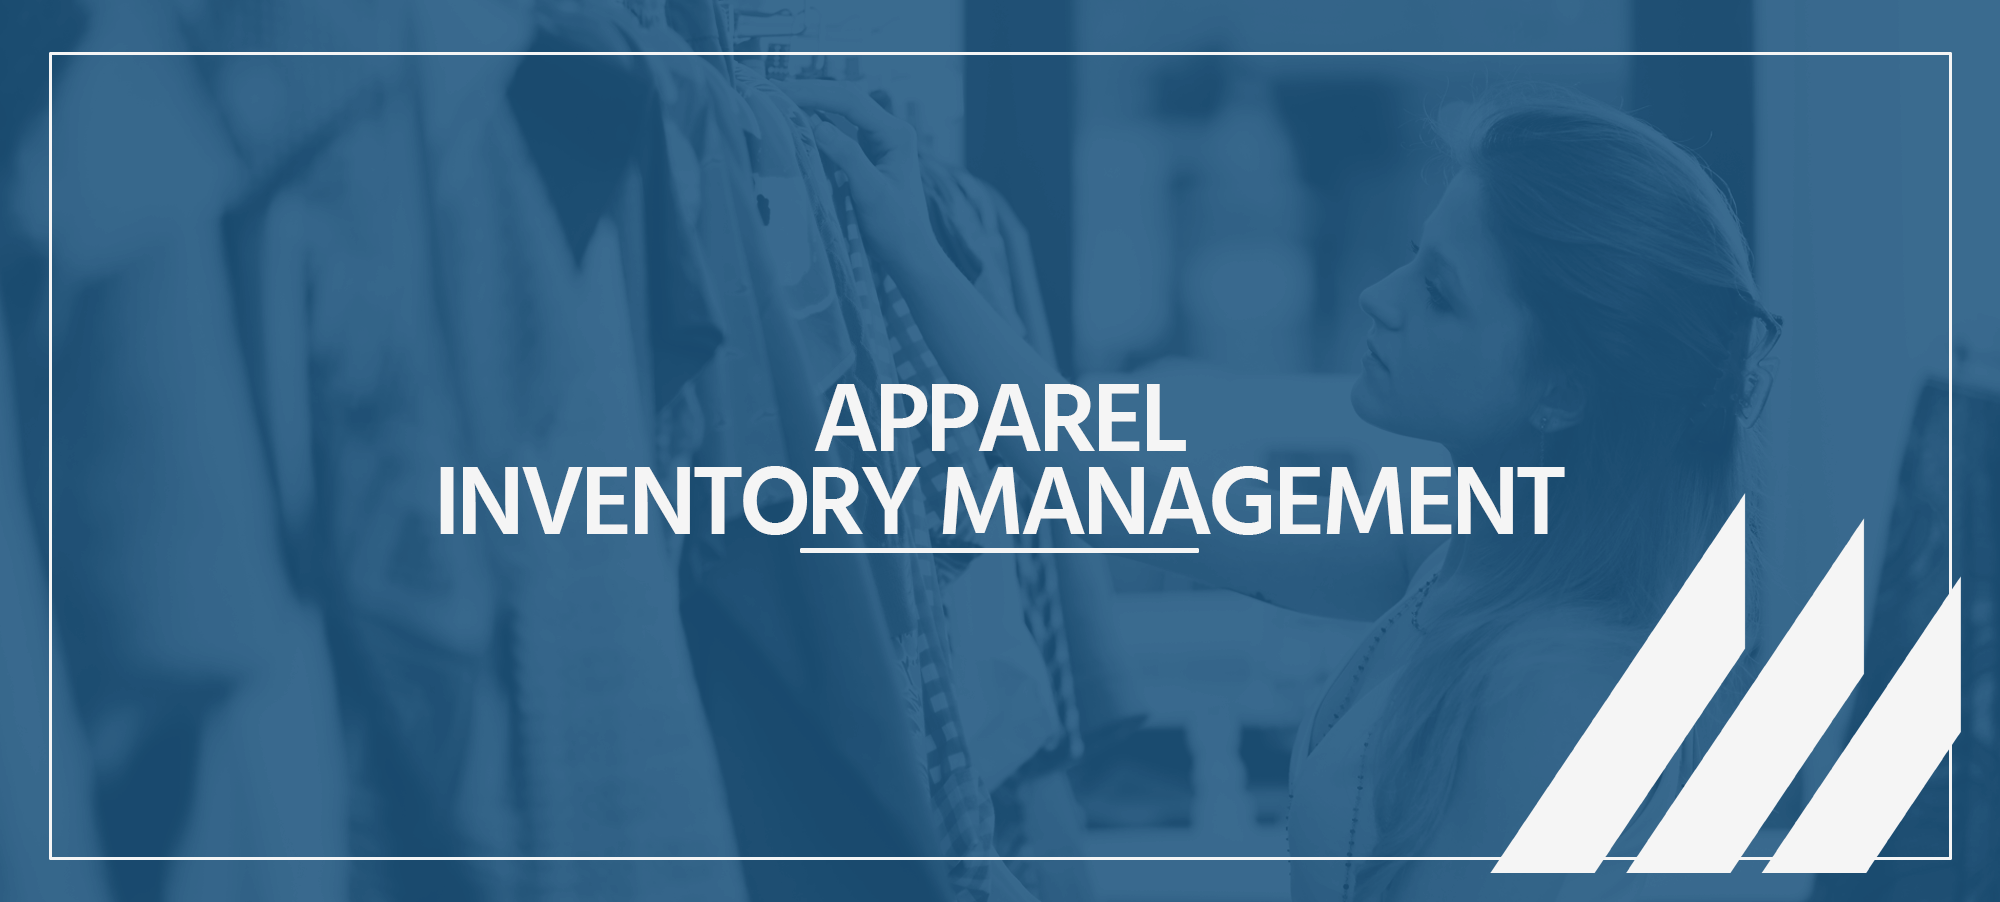 Finale inventory apparel inventory management solution